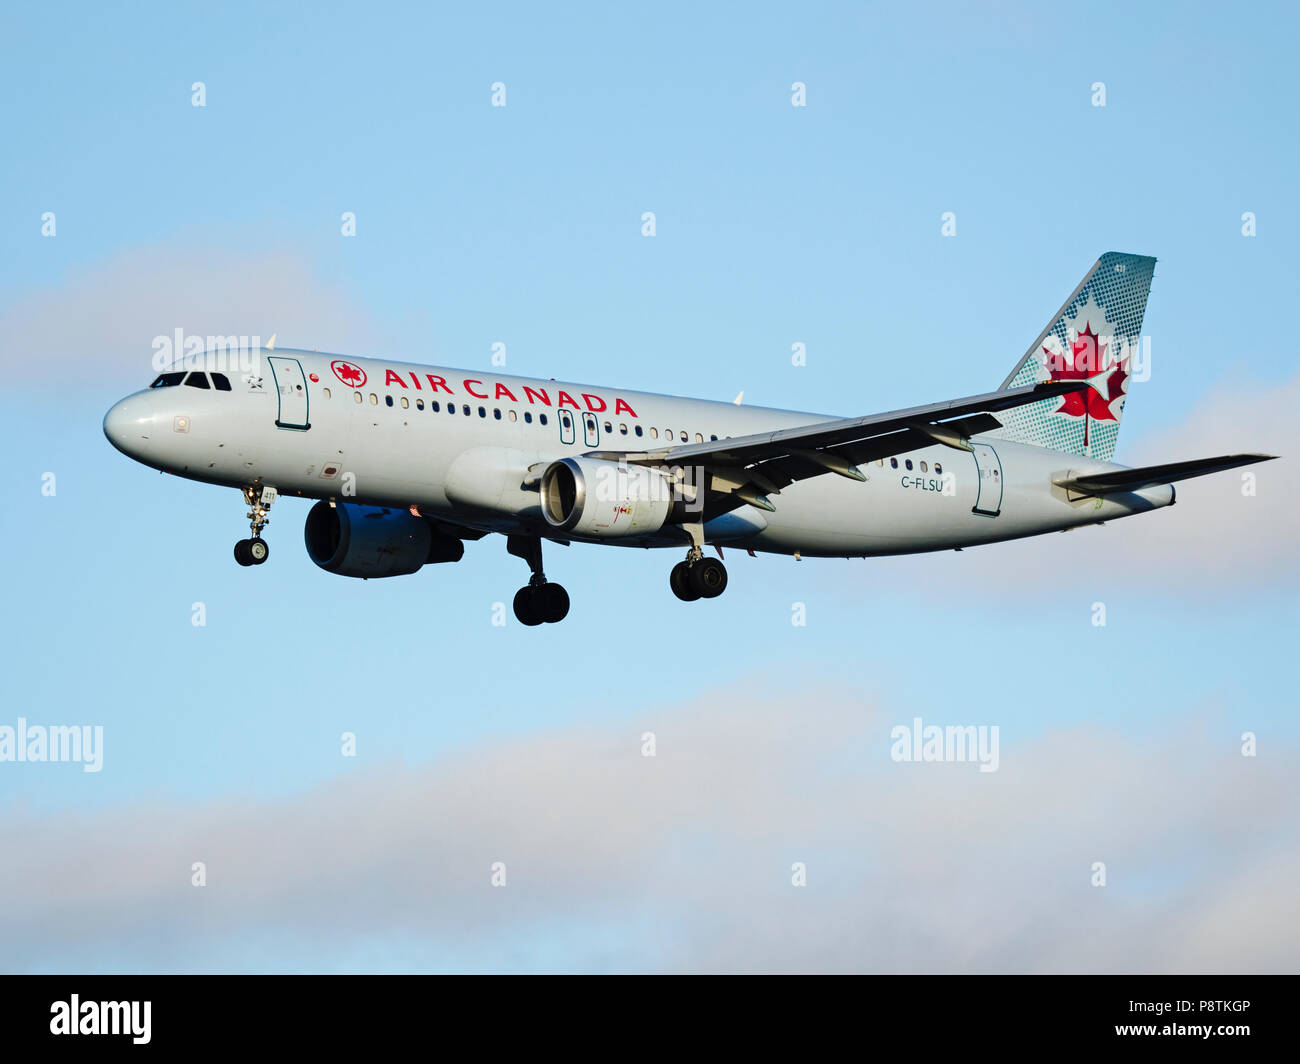 Air Canada plane Airbus A320 single-aisle jet airliner on short final approach for landing at Vancouver International Airport Stock Photo